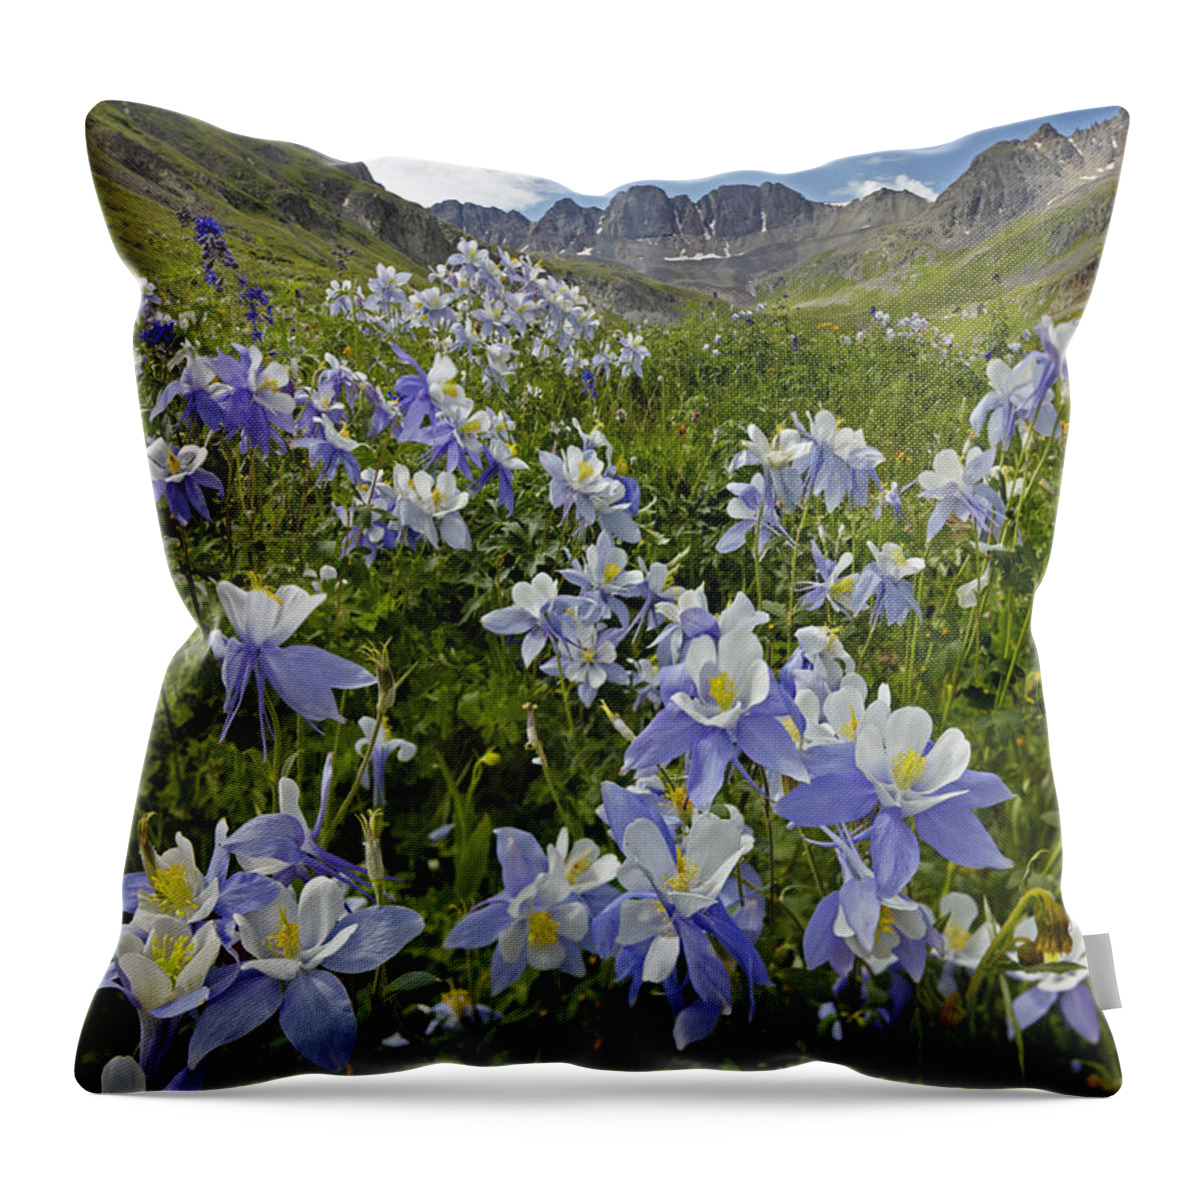 00438895 Throw Pillow featuring the photograph Colorado Blue Columbine Flowers #1 by Tim Fitzharris